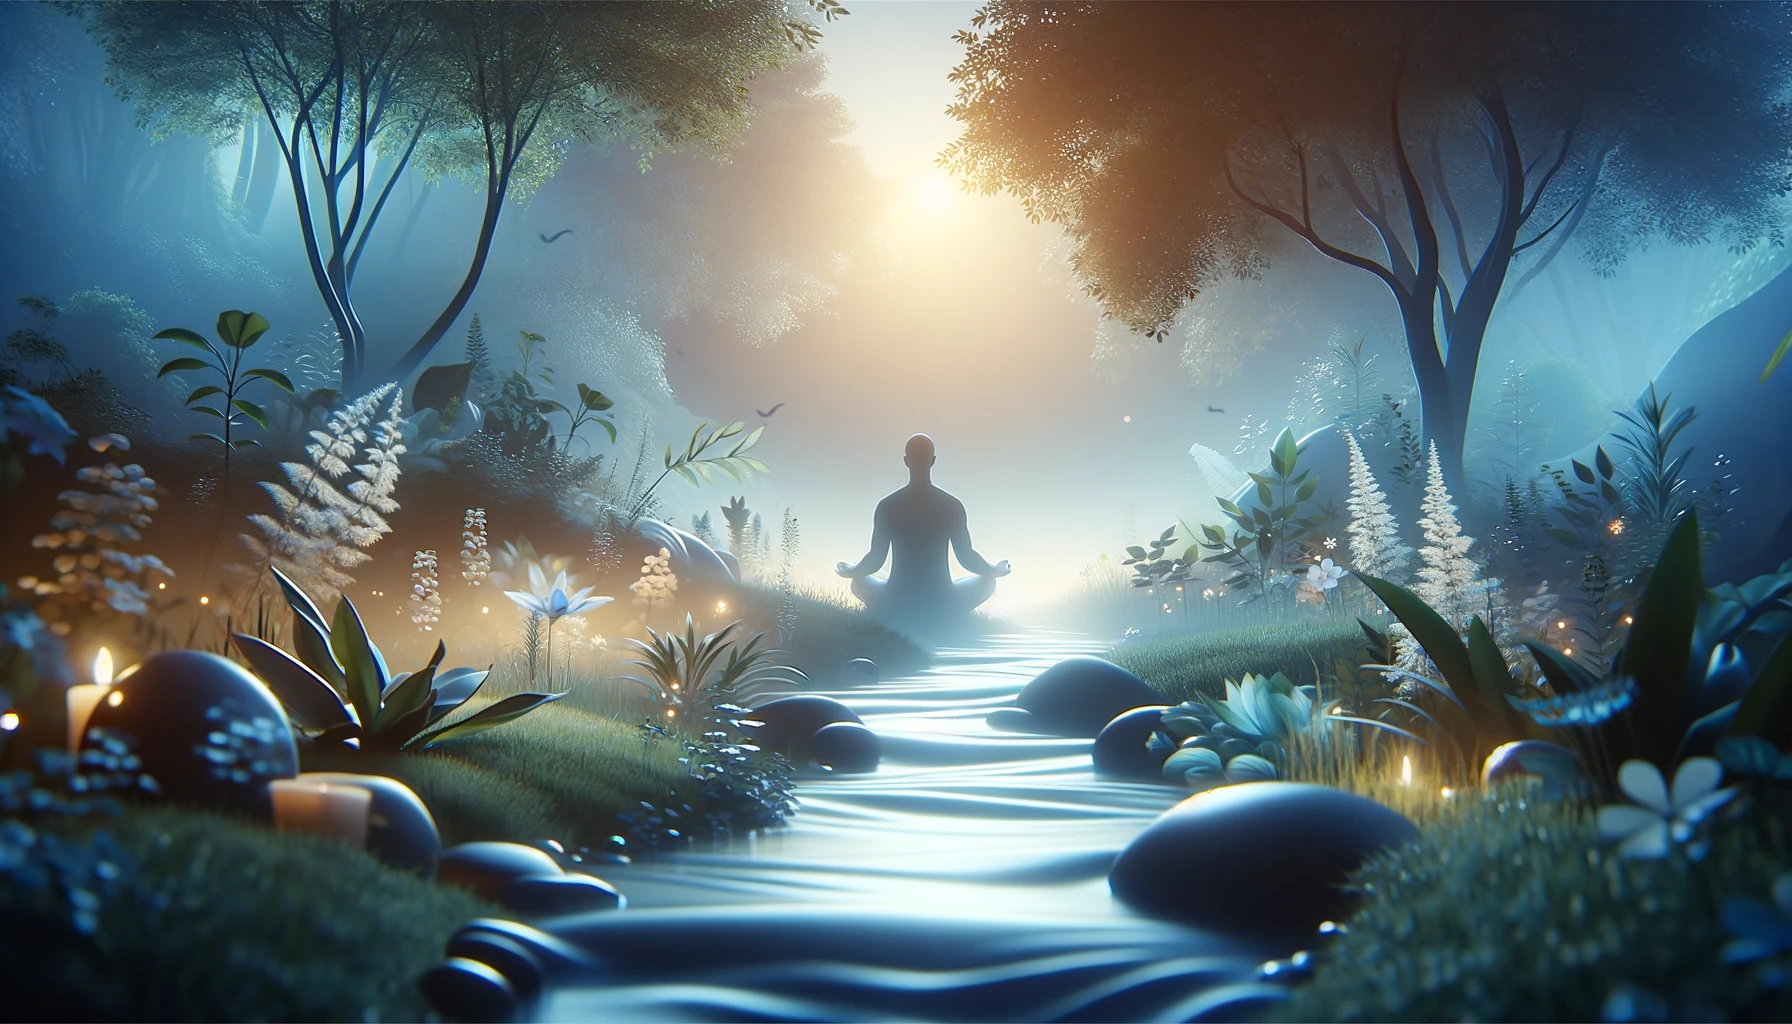 Image illustrating mindfulness, with a person sitting in a peaceful meditation pose surrounded by nature and a calm blue sky.